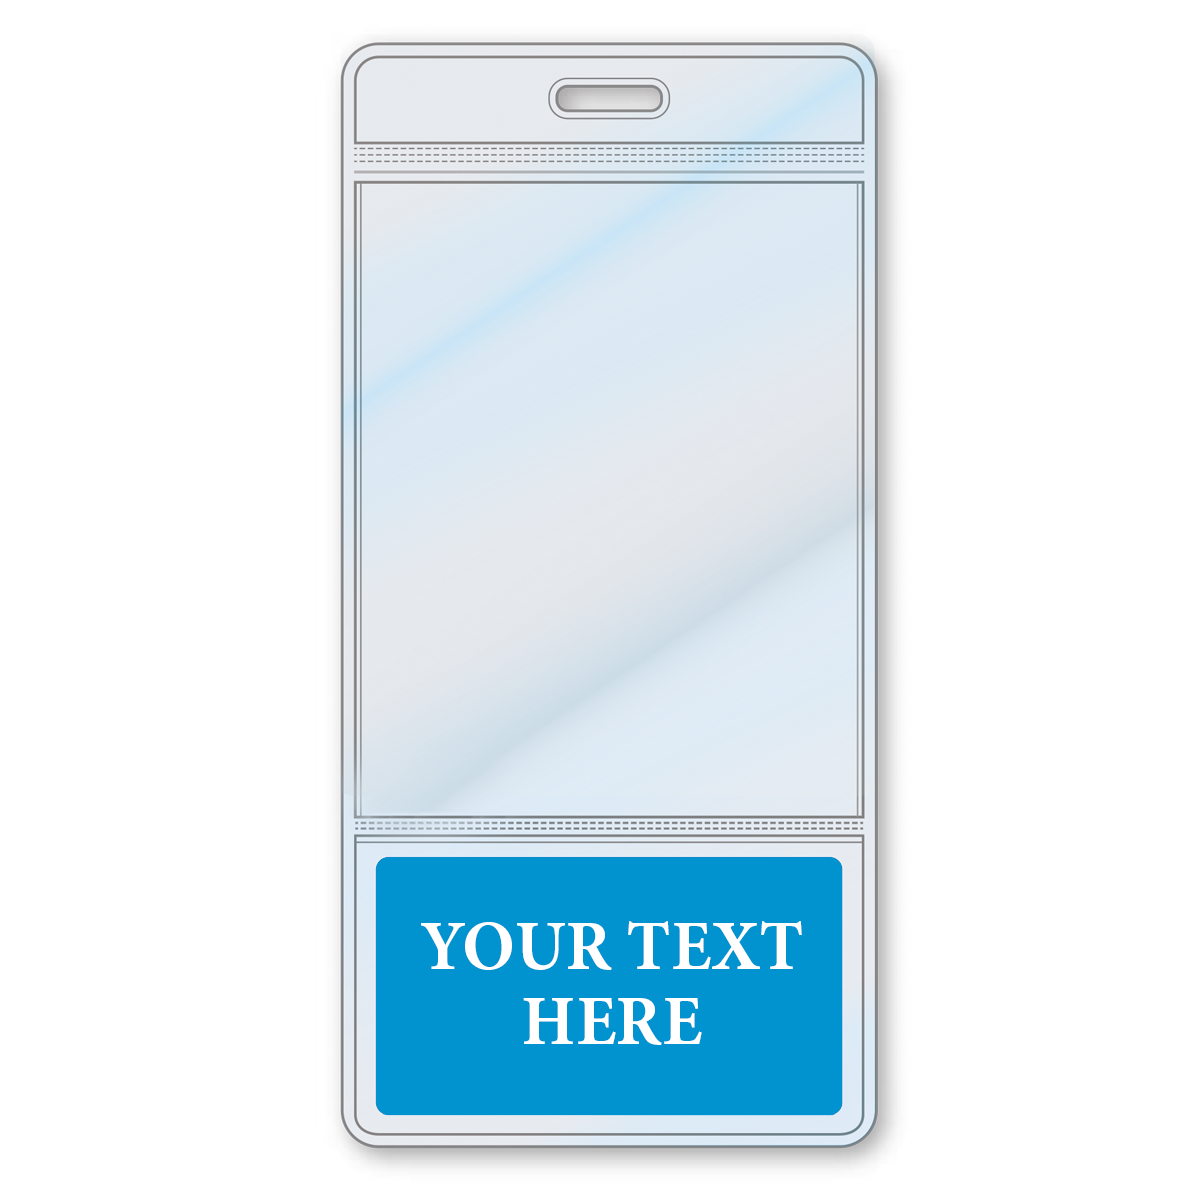 A Custom Printed BadgeBottoms® Vertical (Badge Holder & Badge Buddy IN ONE!!) featuring a blank name badge with a blue section at the bottom labeled "Your Text Here" and a clear plastic cover on top.